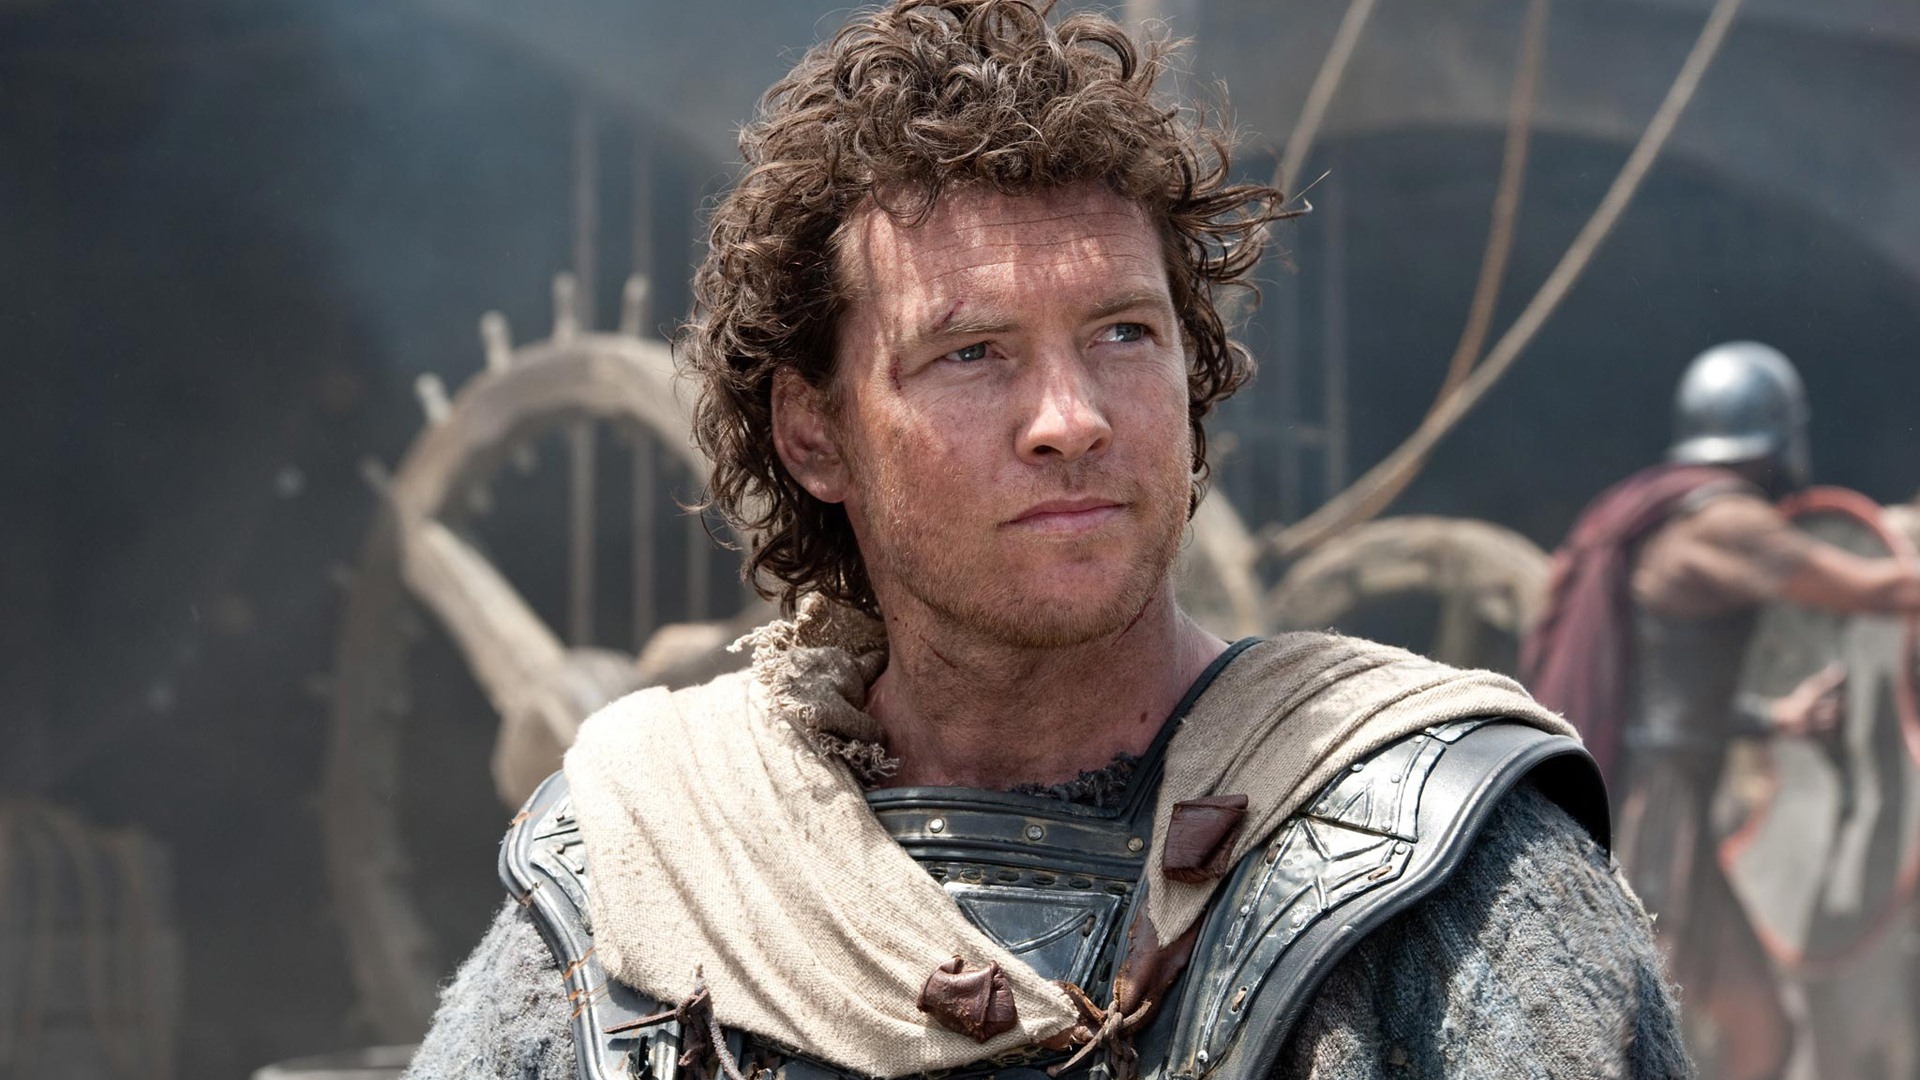 Wrath of the Titans HD Wallpapers #5 - 1920x1080